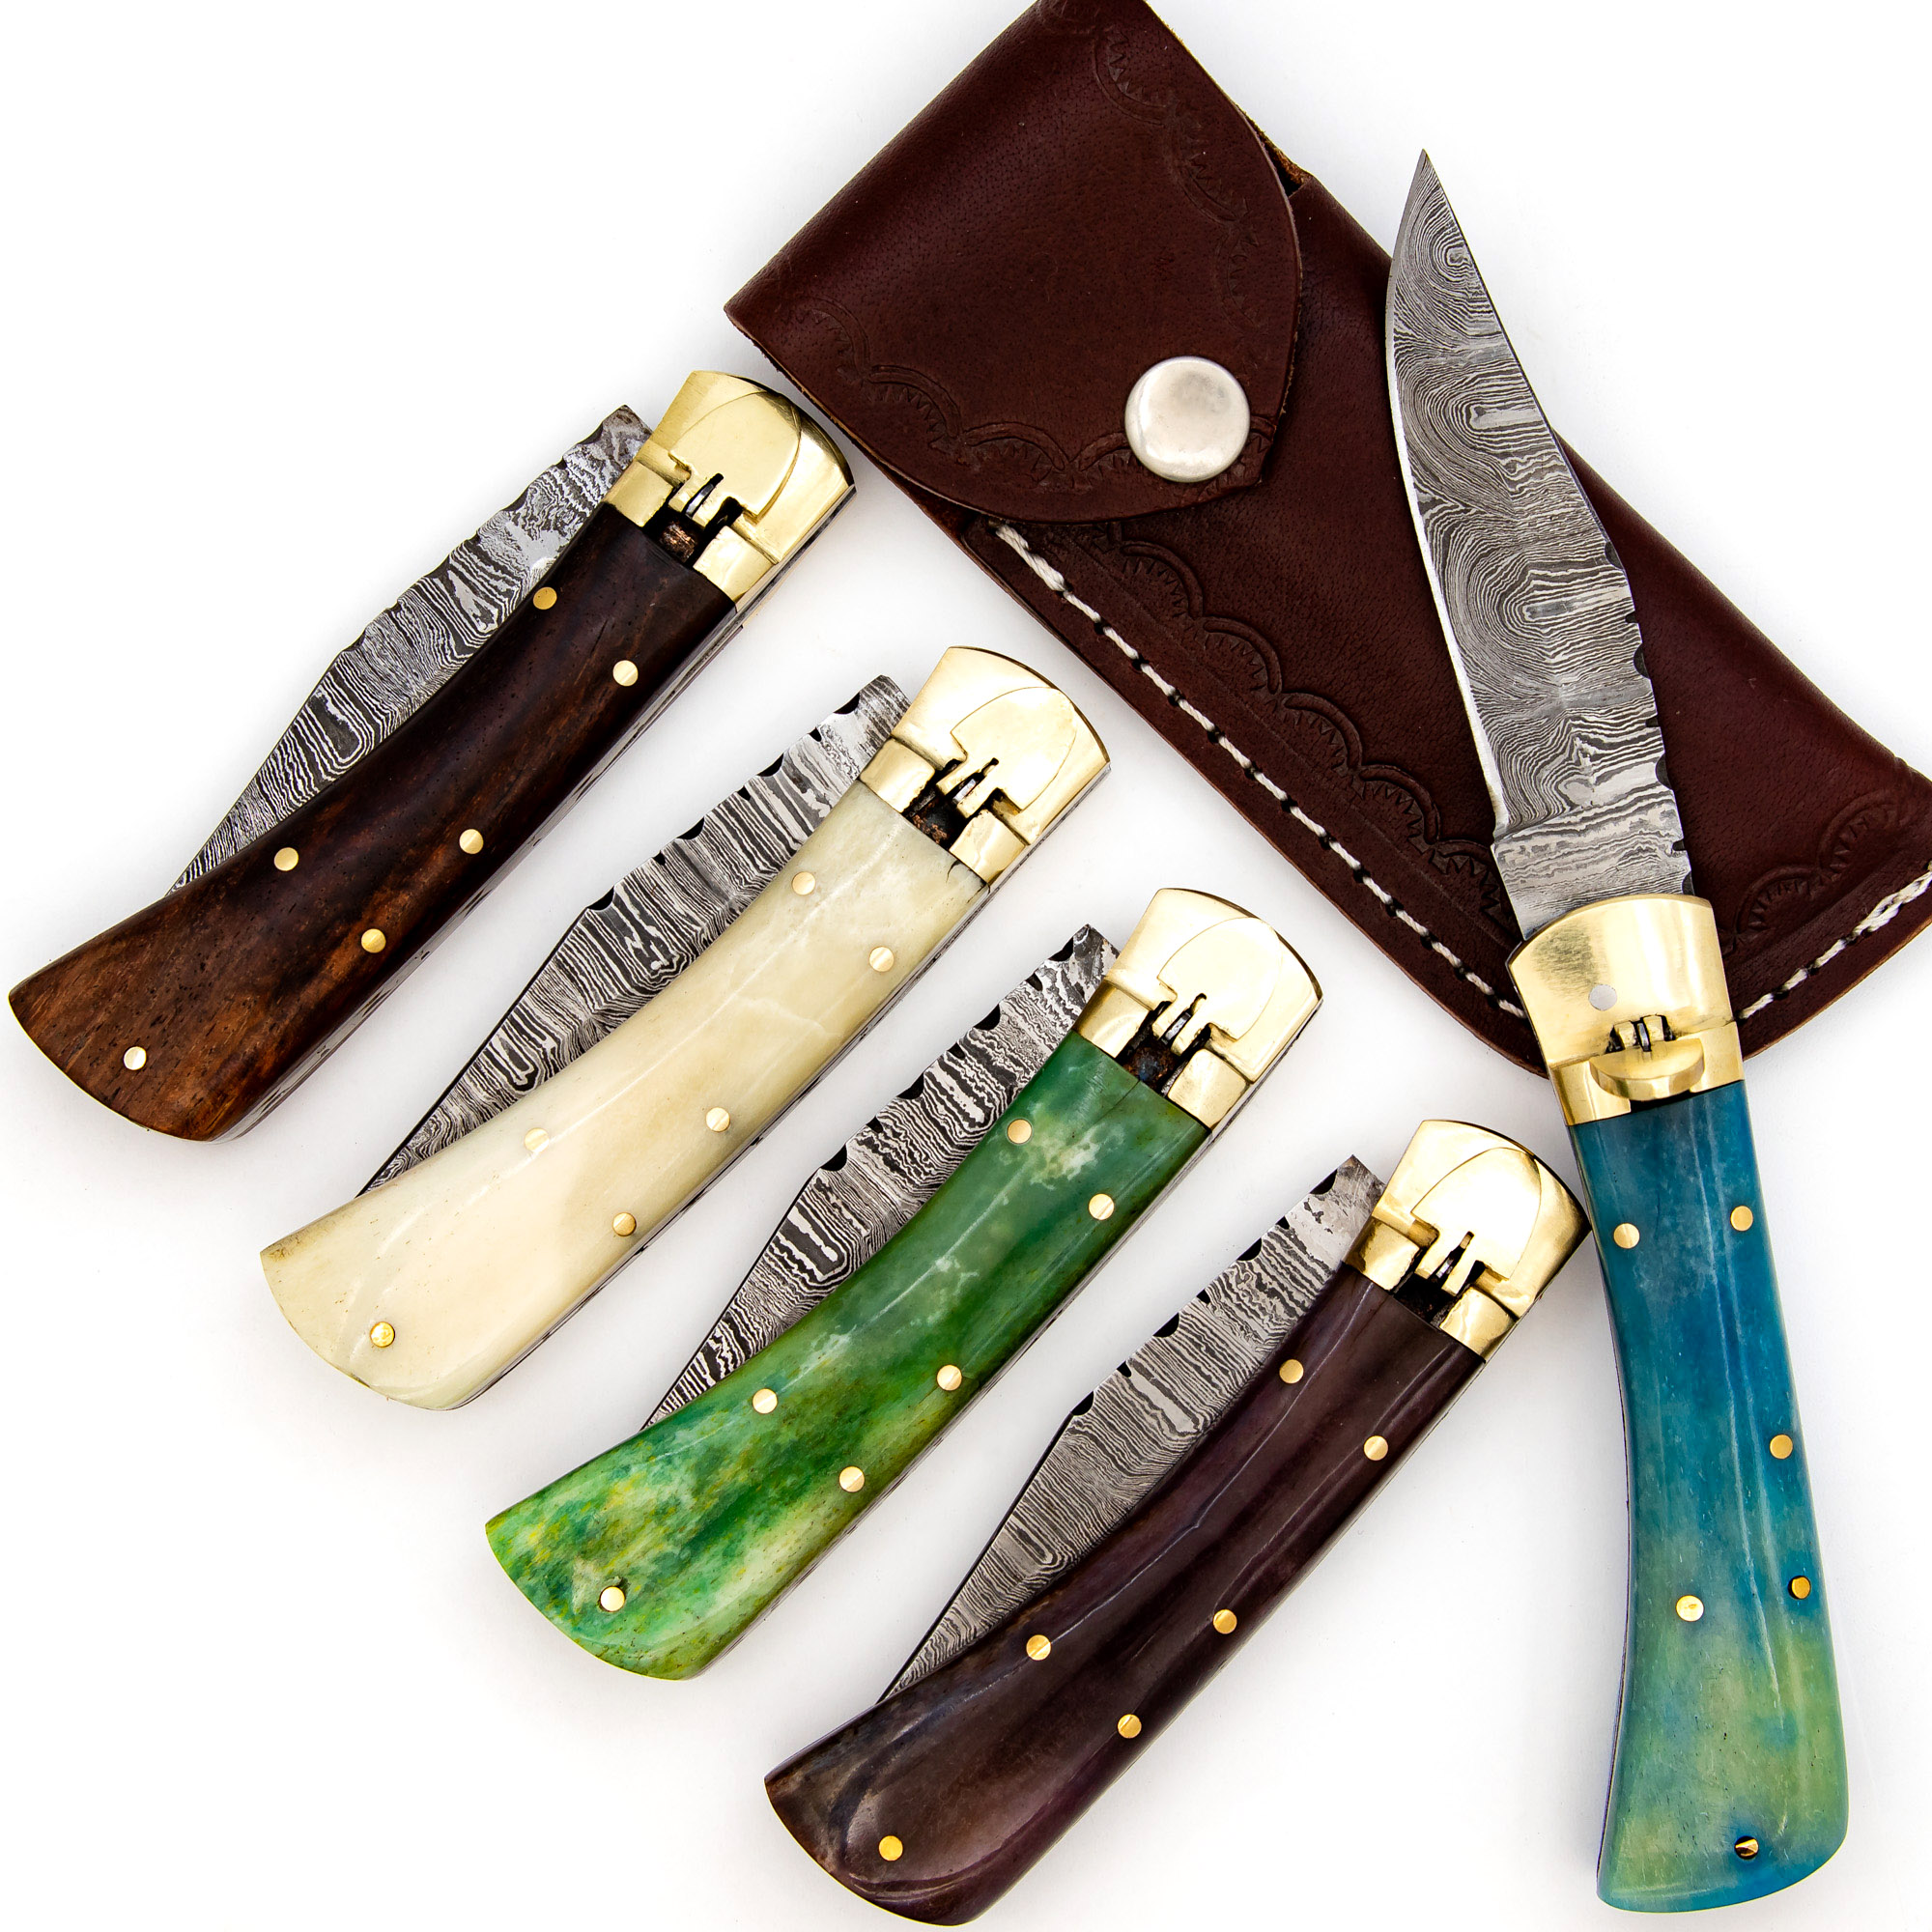 Roughneck Driller Handcrafted Automatic Lever Lock Knife | Choose Your Handle